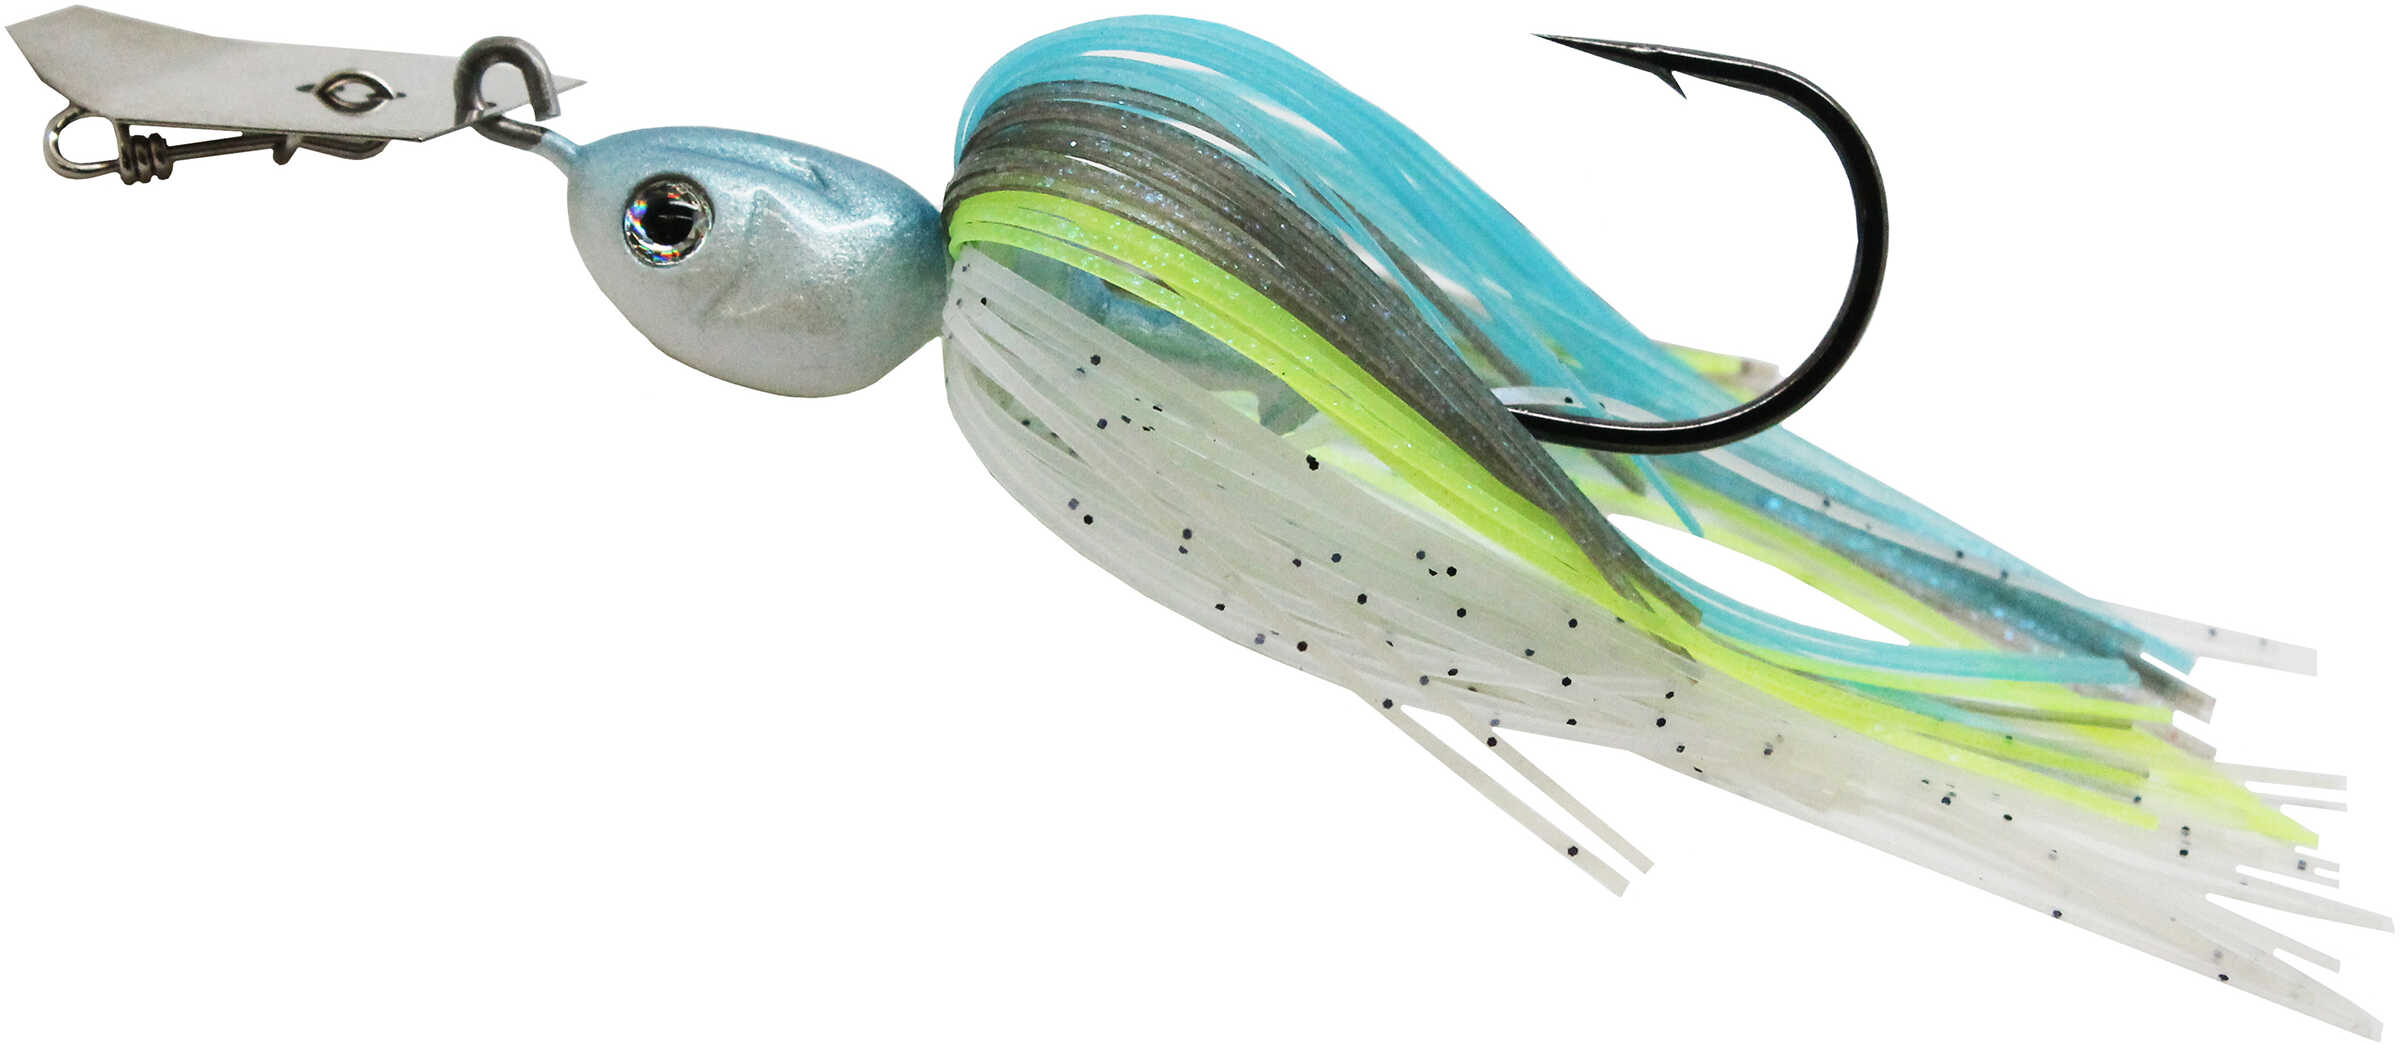 Z-Man Project Z ChatterBait 3/8-Ounce Lure, Sexier Shad, 1-Pack Md: CB-PZ38-03